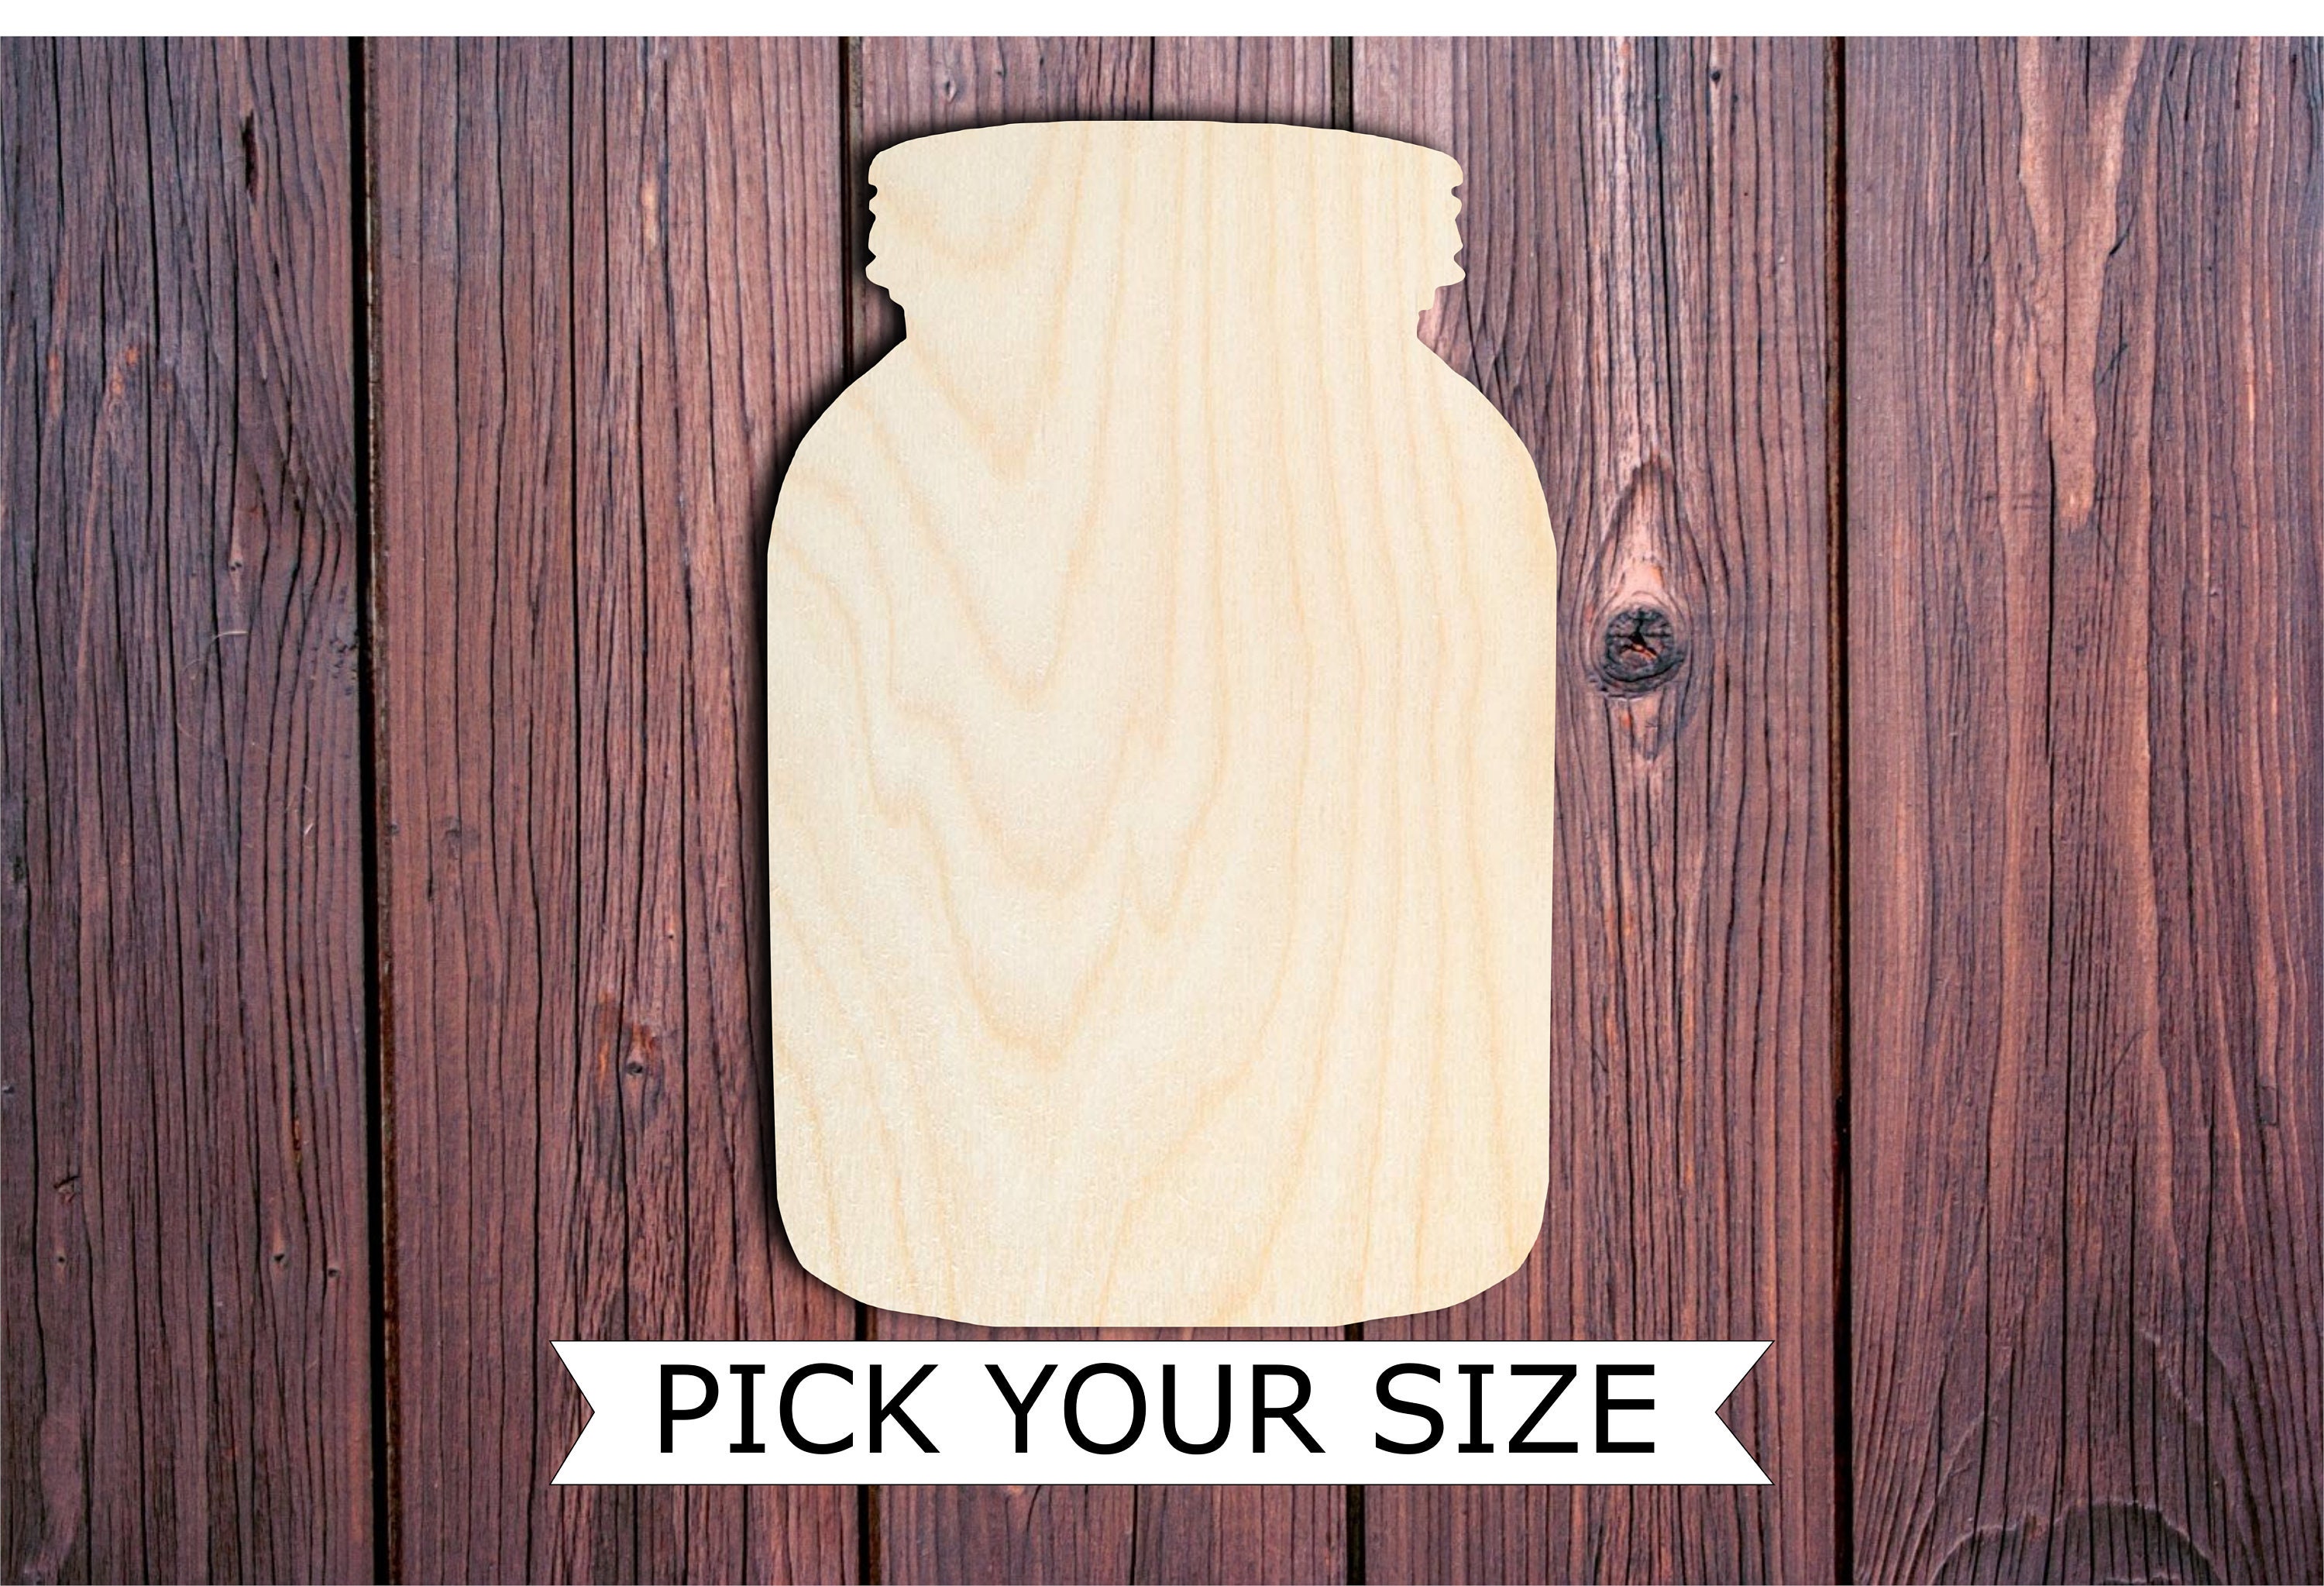  Mason Jar Sign 8 x 4-4/5-inch, Pack of 3 Wooden Cutouts  Unfinished, Mason Jar on Wood for Wood Burning Projects & Decor, by  Woodpeckers